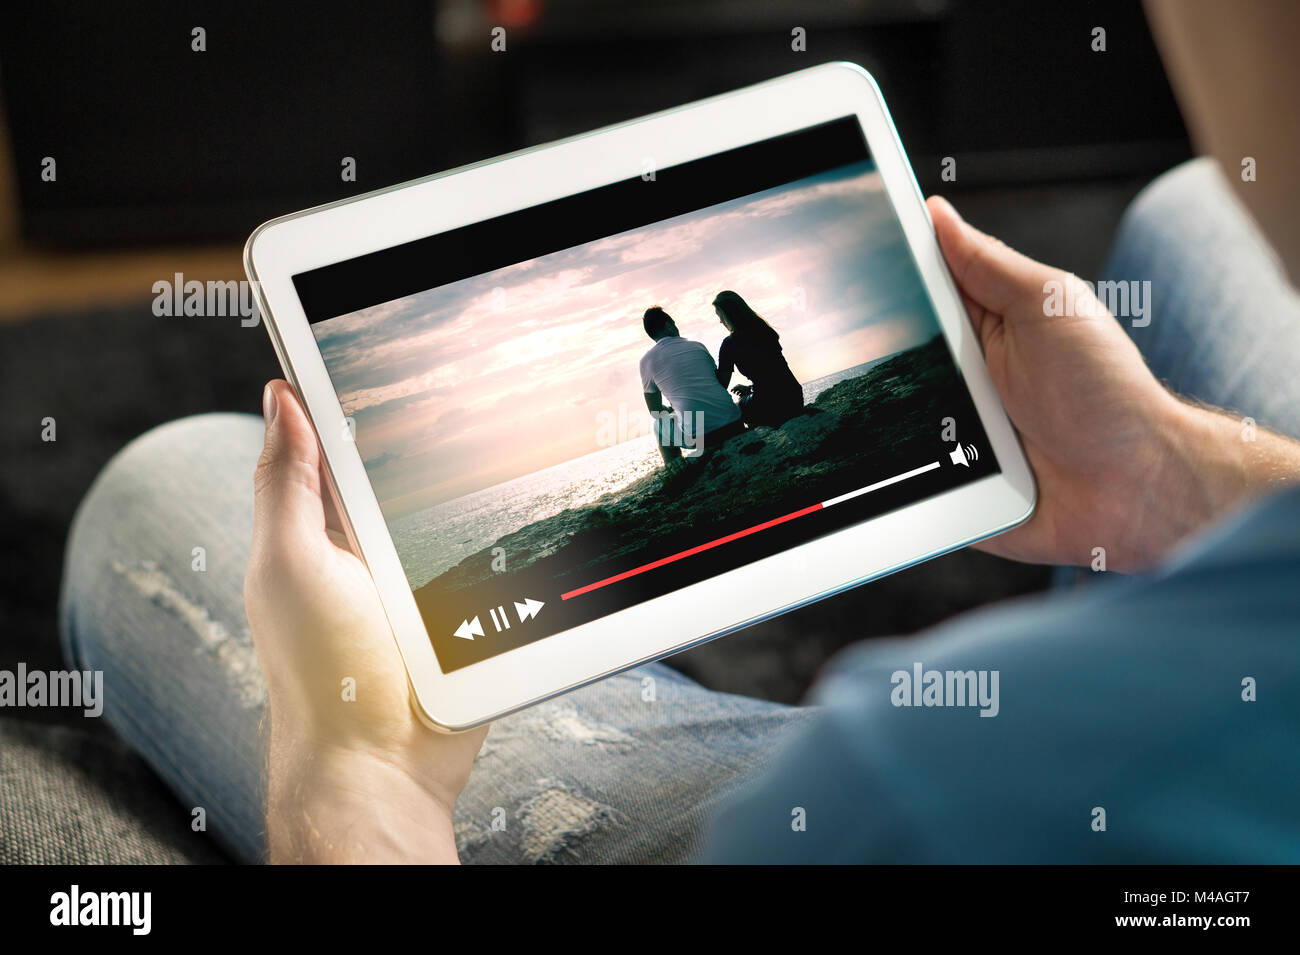 Online movie stream with mobile device. Man watching film on tablet with imaginary video player service. Stock Photo